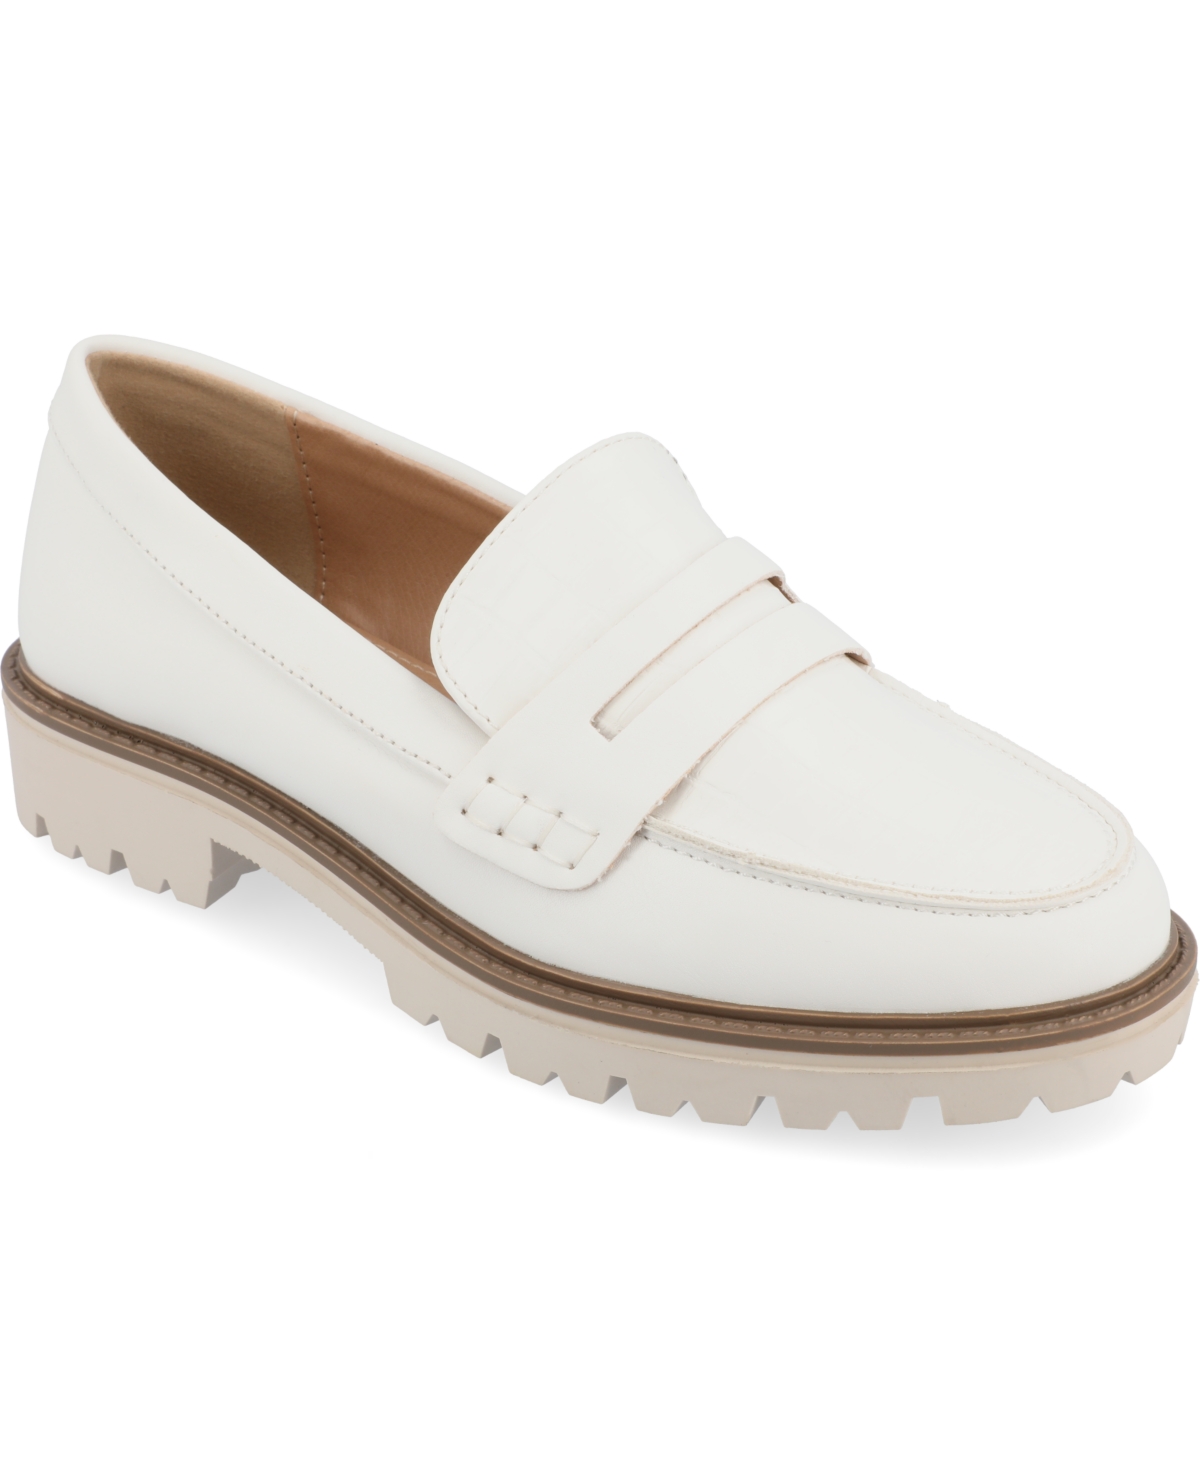 Women's Kenly Lug Sole Loafers - White